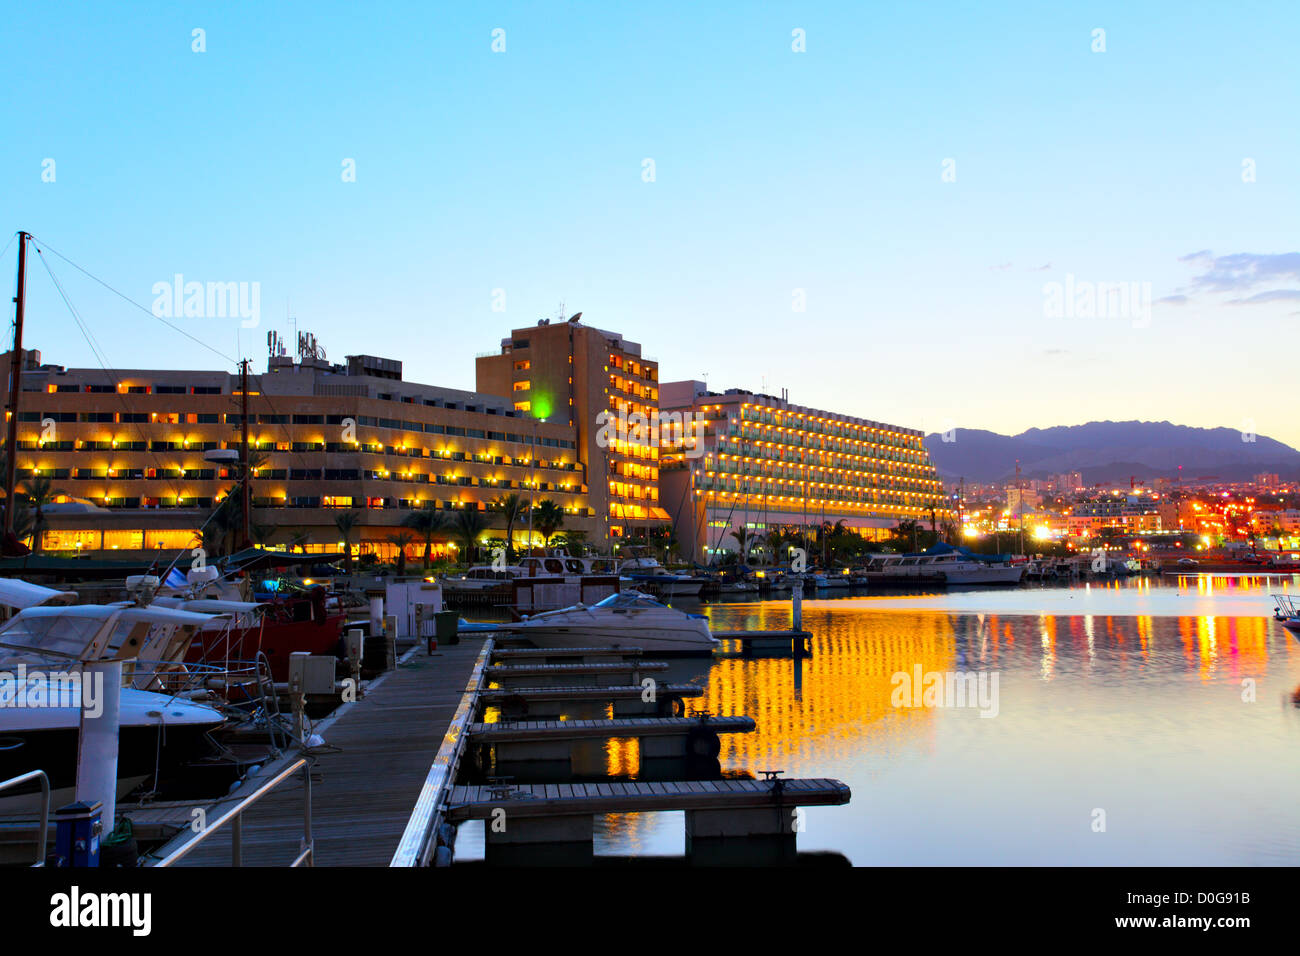 Hotels and yachts at sunset. Eilat. Israel. Stock Photo